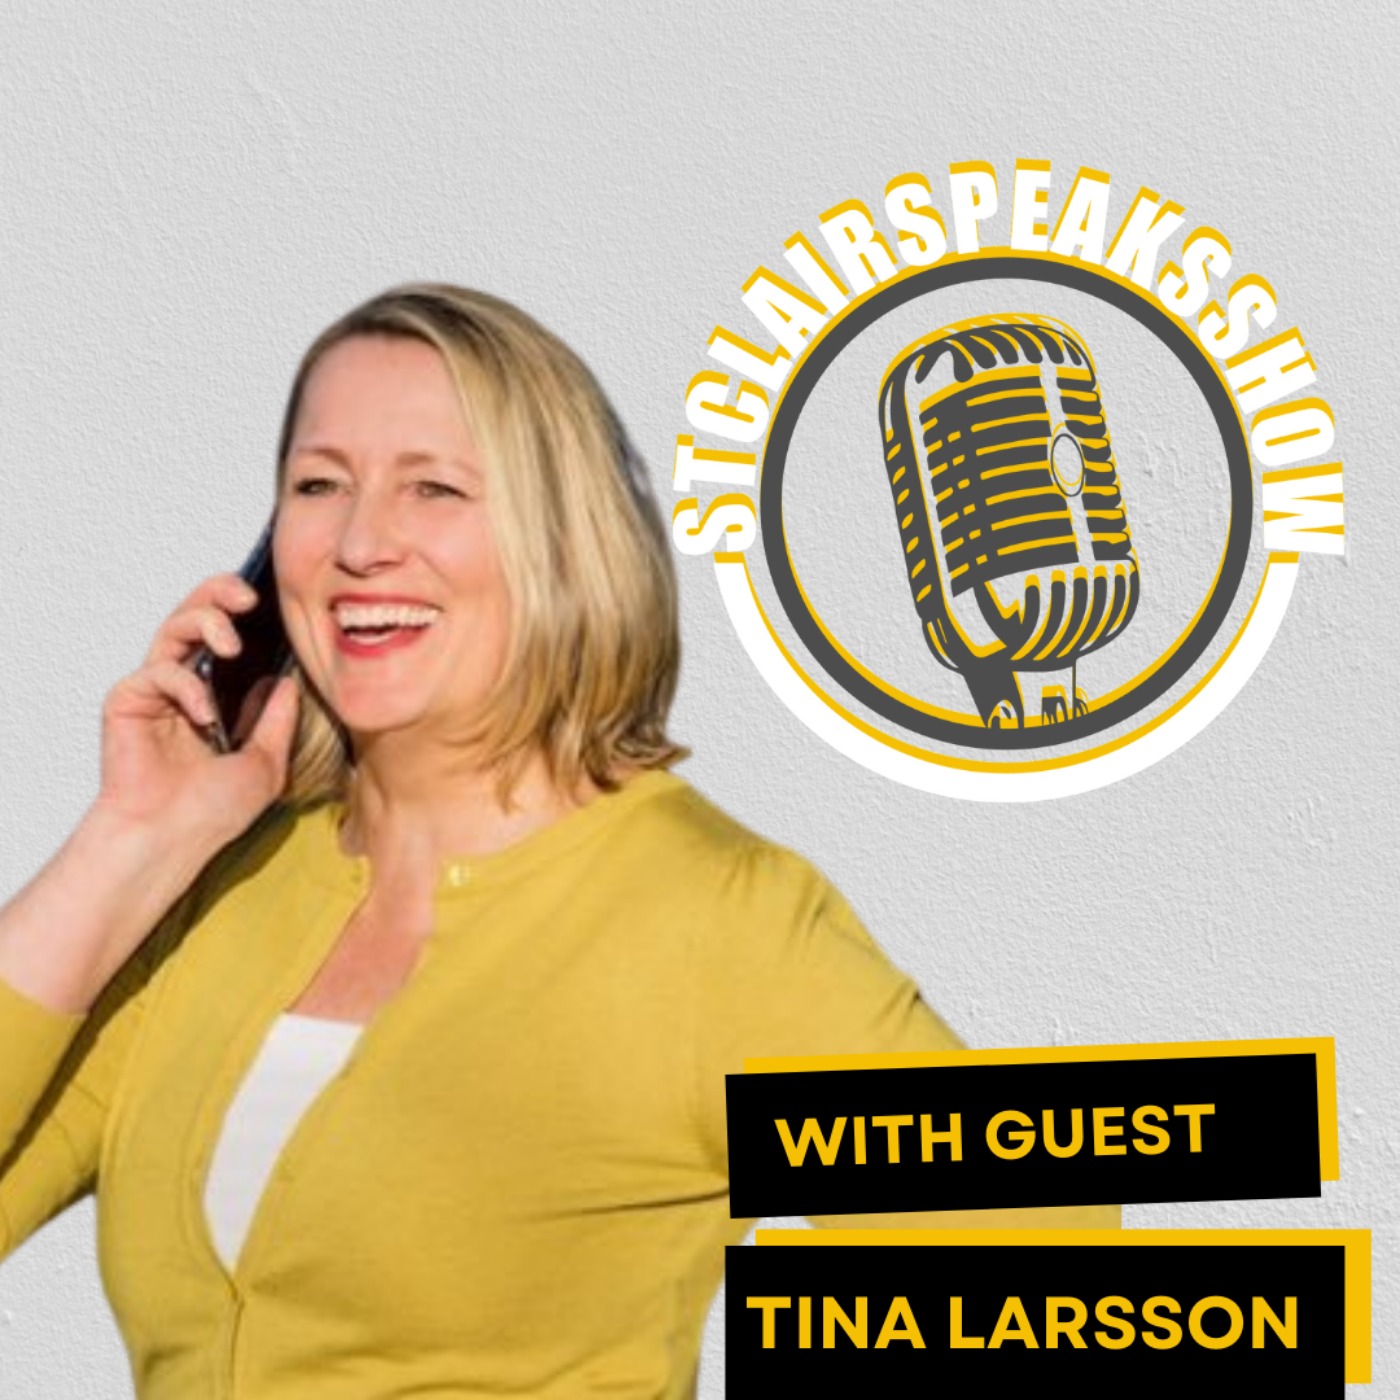 The StclairSpeaksShow Podcast with Tina Larsson - Sustainability & Reactive To Proactive Organization